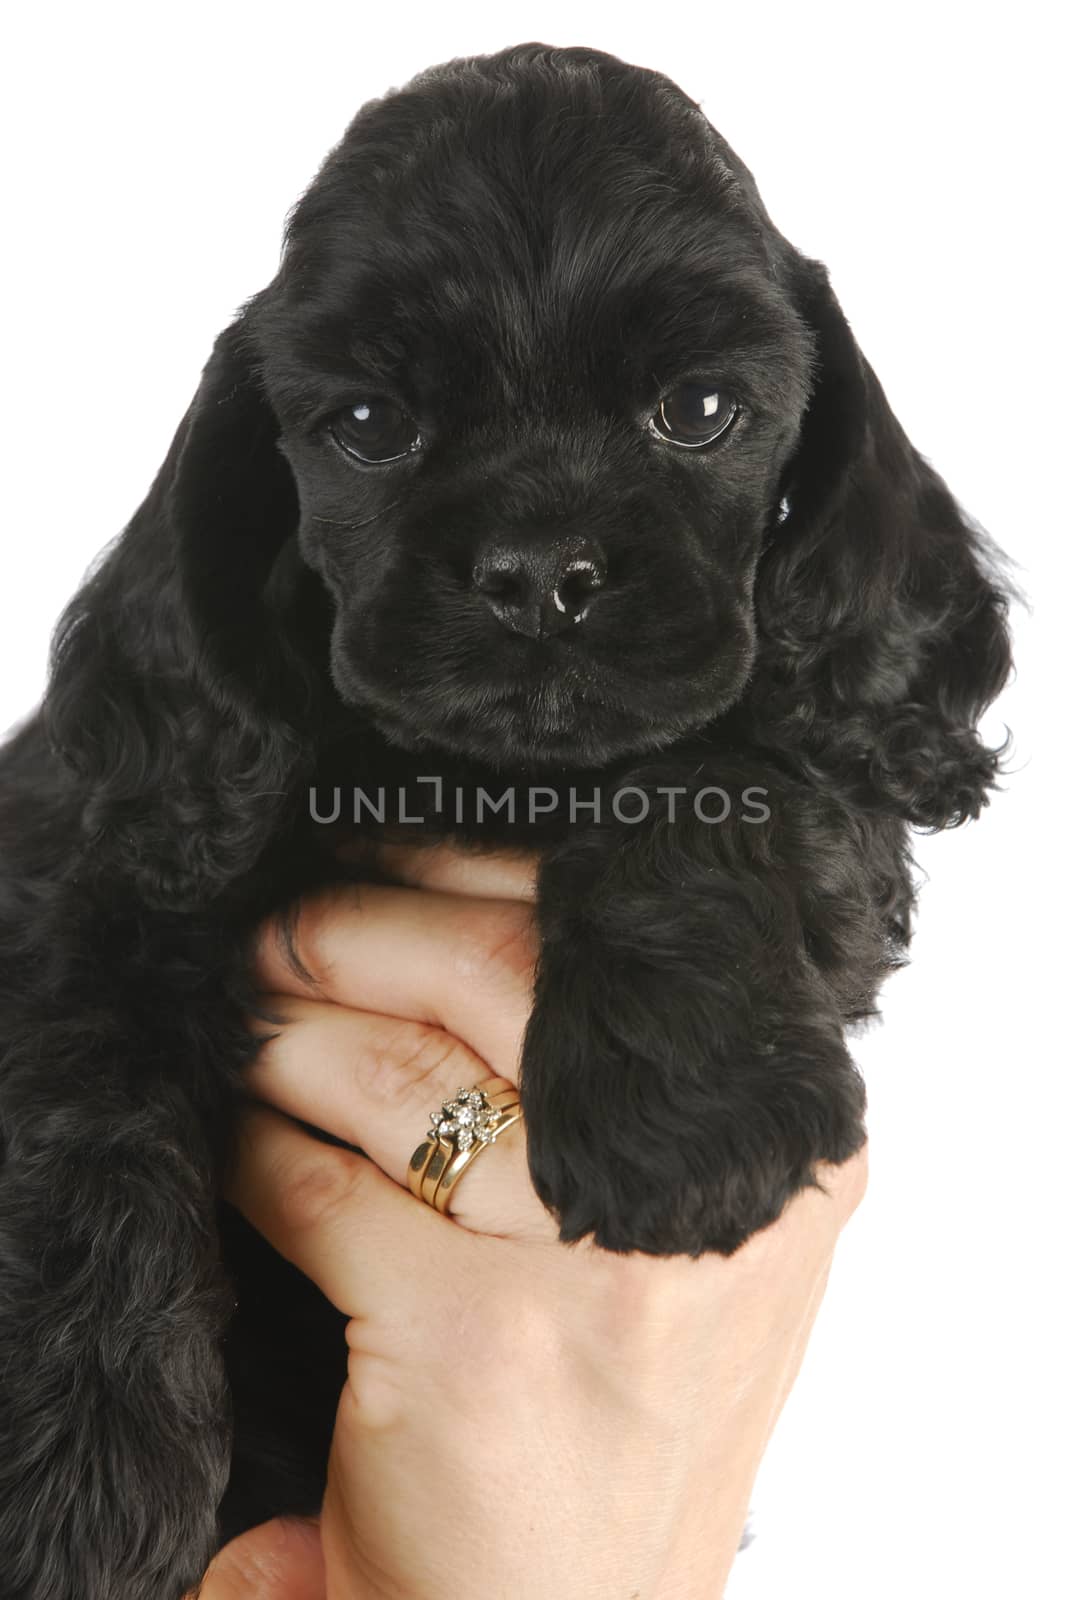 cute puppy - hand holding black american cocker spaniel puppy - 6 weeks old